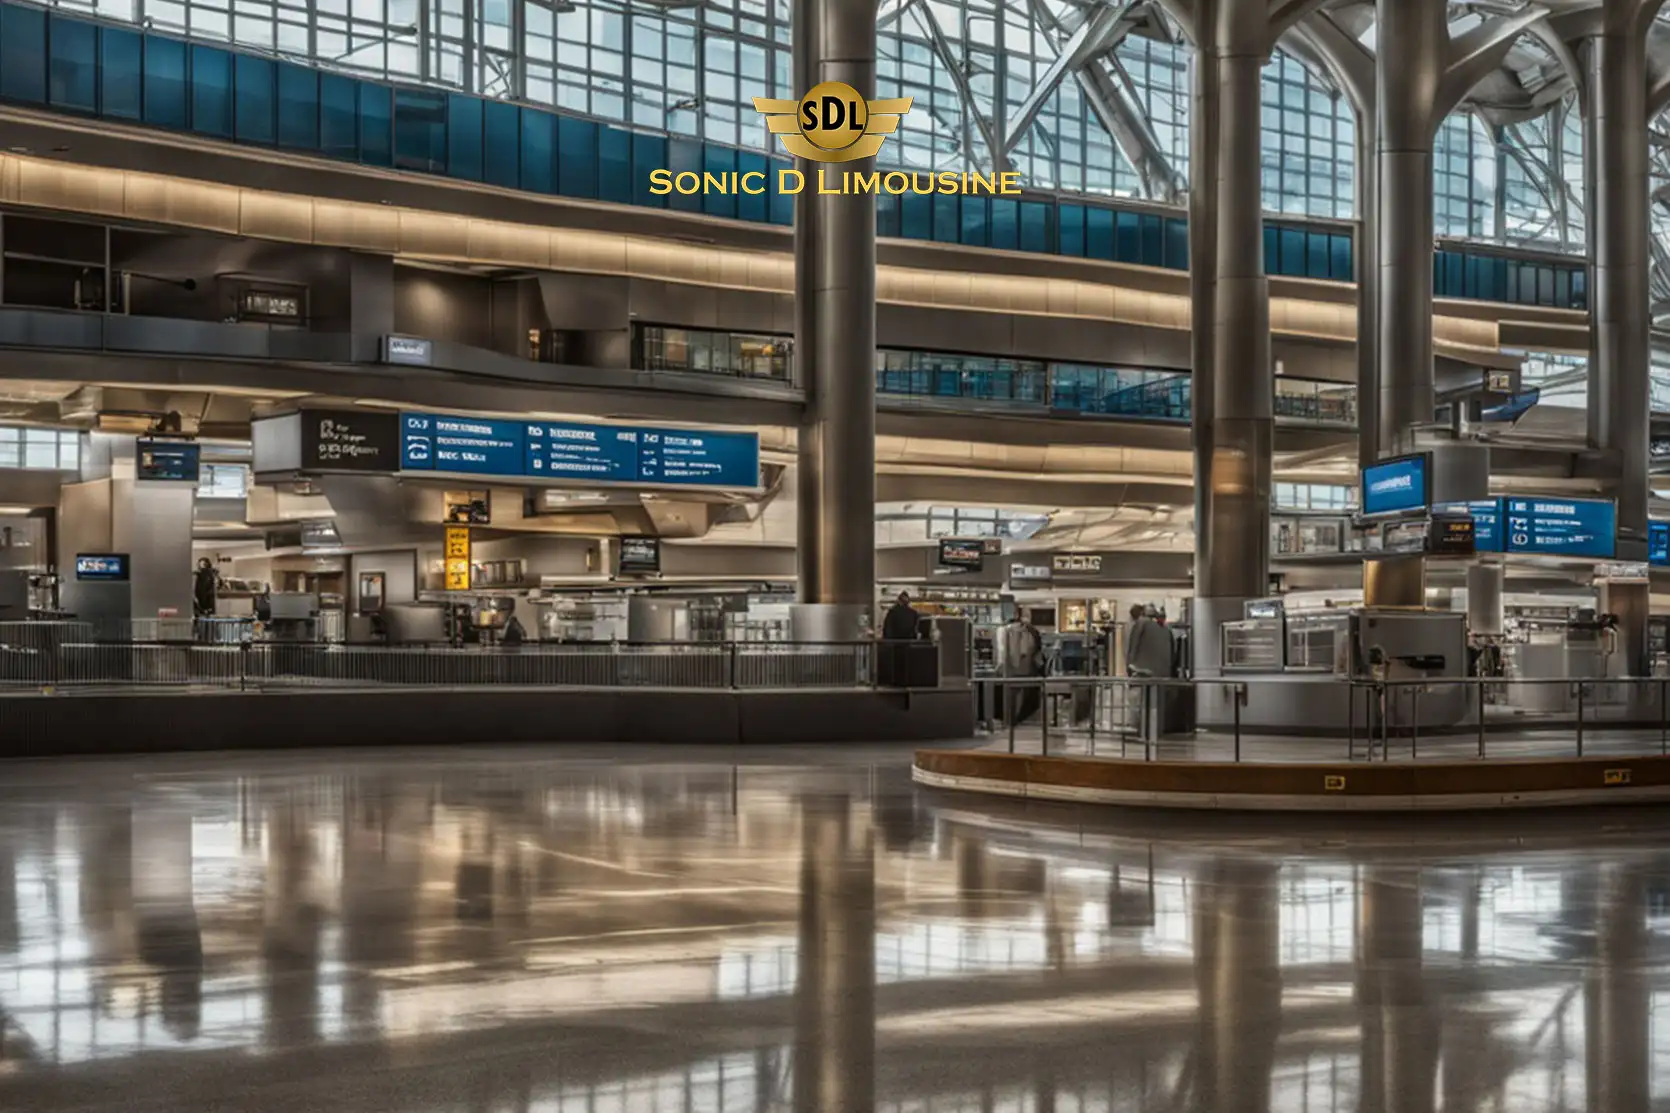 Sonic D Limousine is the premier transportation provider in The Ultimate Guide to Traveling from LaGuardia to Newark Airport: Shuttle, Bus, and Other Transportation Options